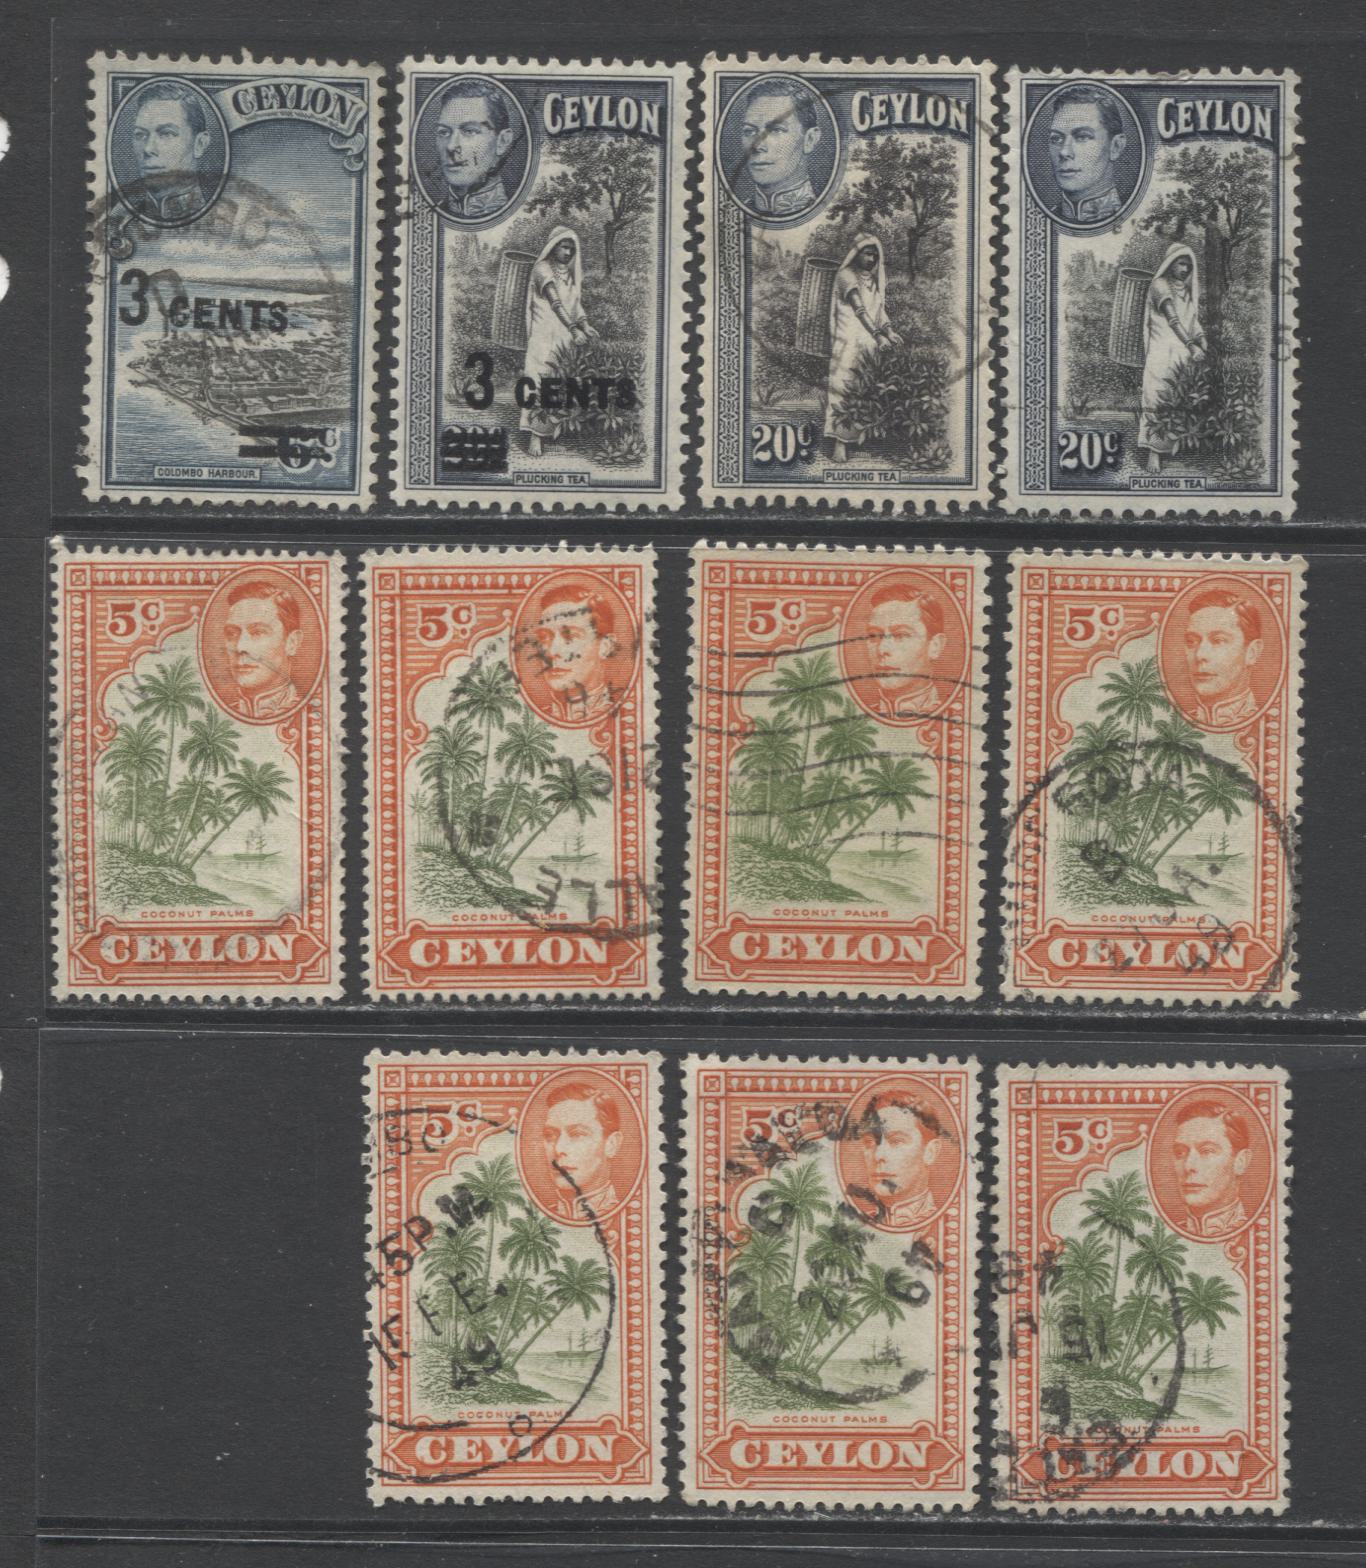 Lot 94 Ceylon SC#279/292a 1938-1952 King George VI Definitives, A VF Used Range Of Singles to the 15c, With Sideways and Upright Watermarks and Most Listed Perfs, 2017 Scott Cat. $40.05 USD, Click on Listing to See ALL Pictures